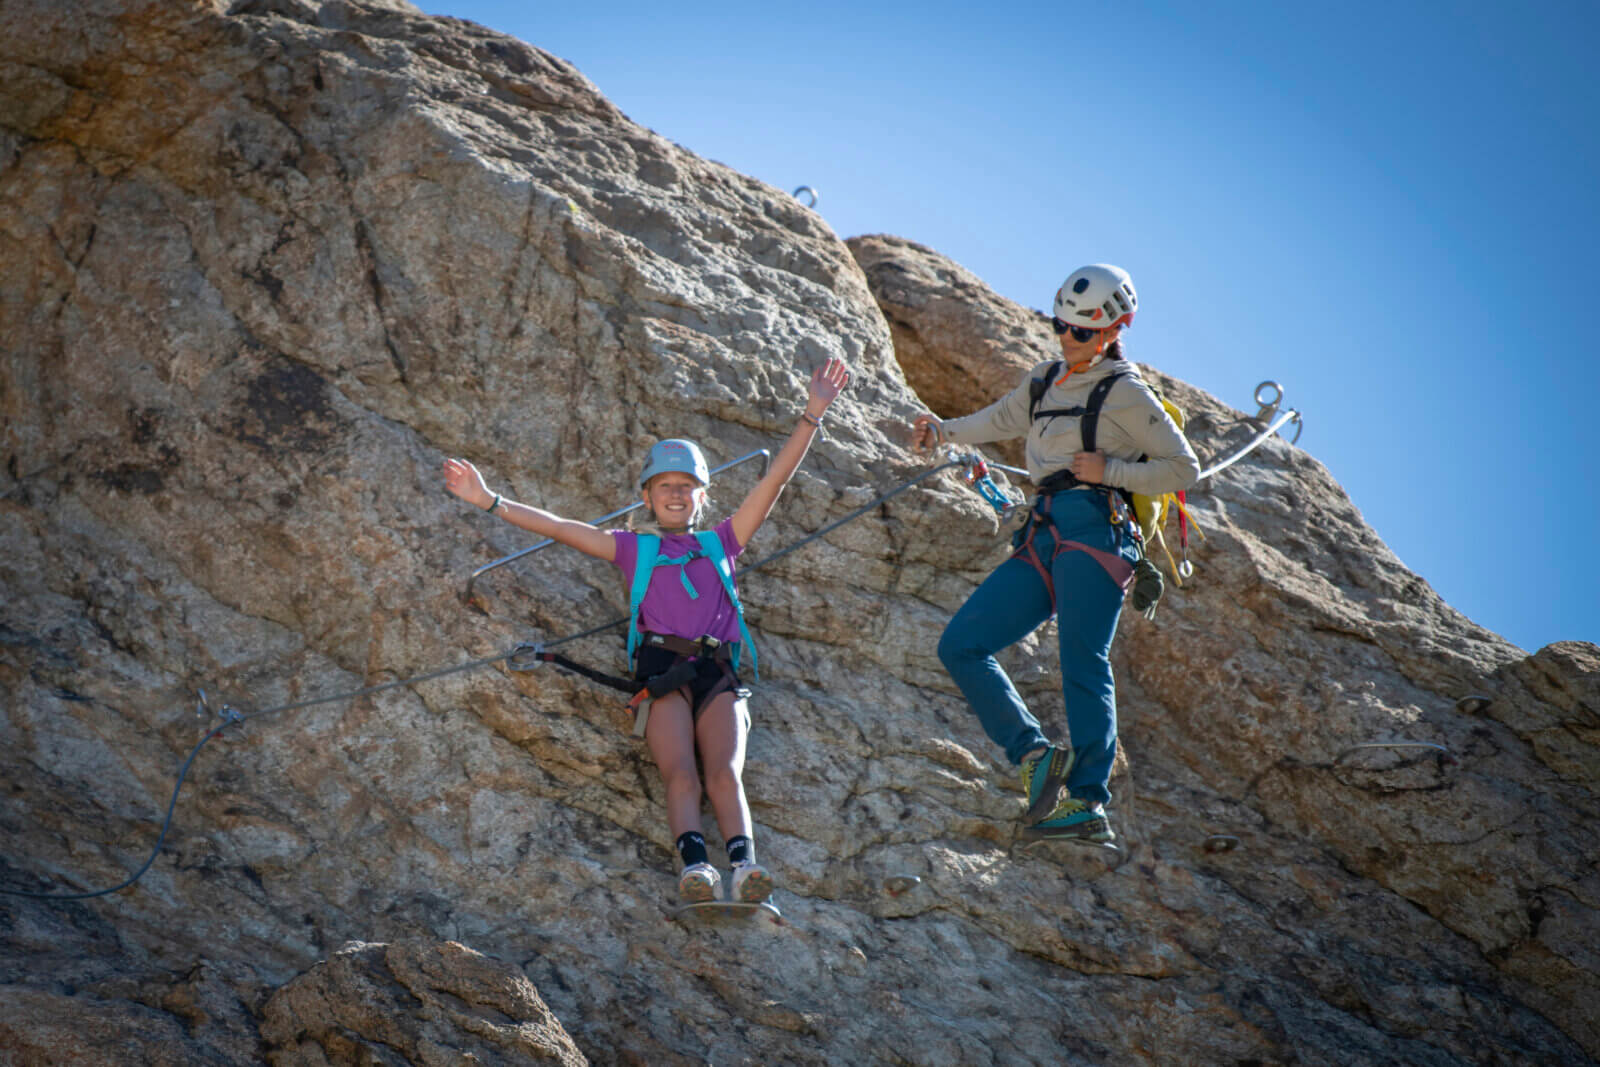 A young climber and a guide climbing the Tahoe Via Ferrata at Palisades Tahoe in Olympic Valley. One of the best Lake Tahoe adventures!